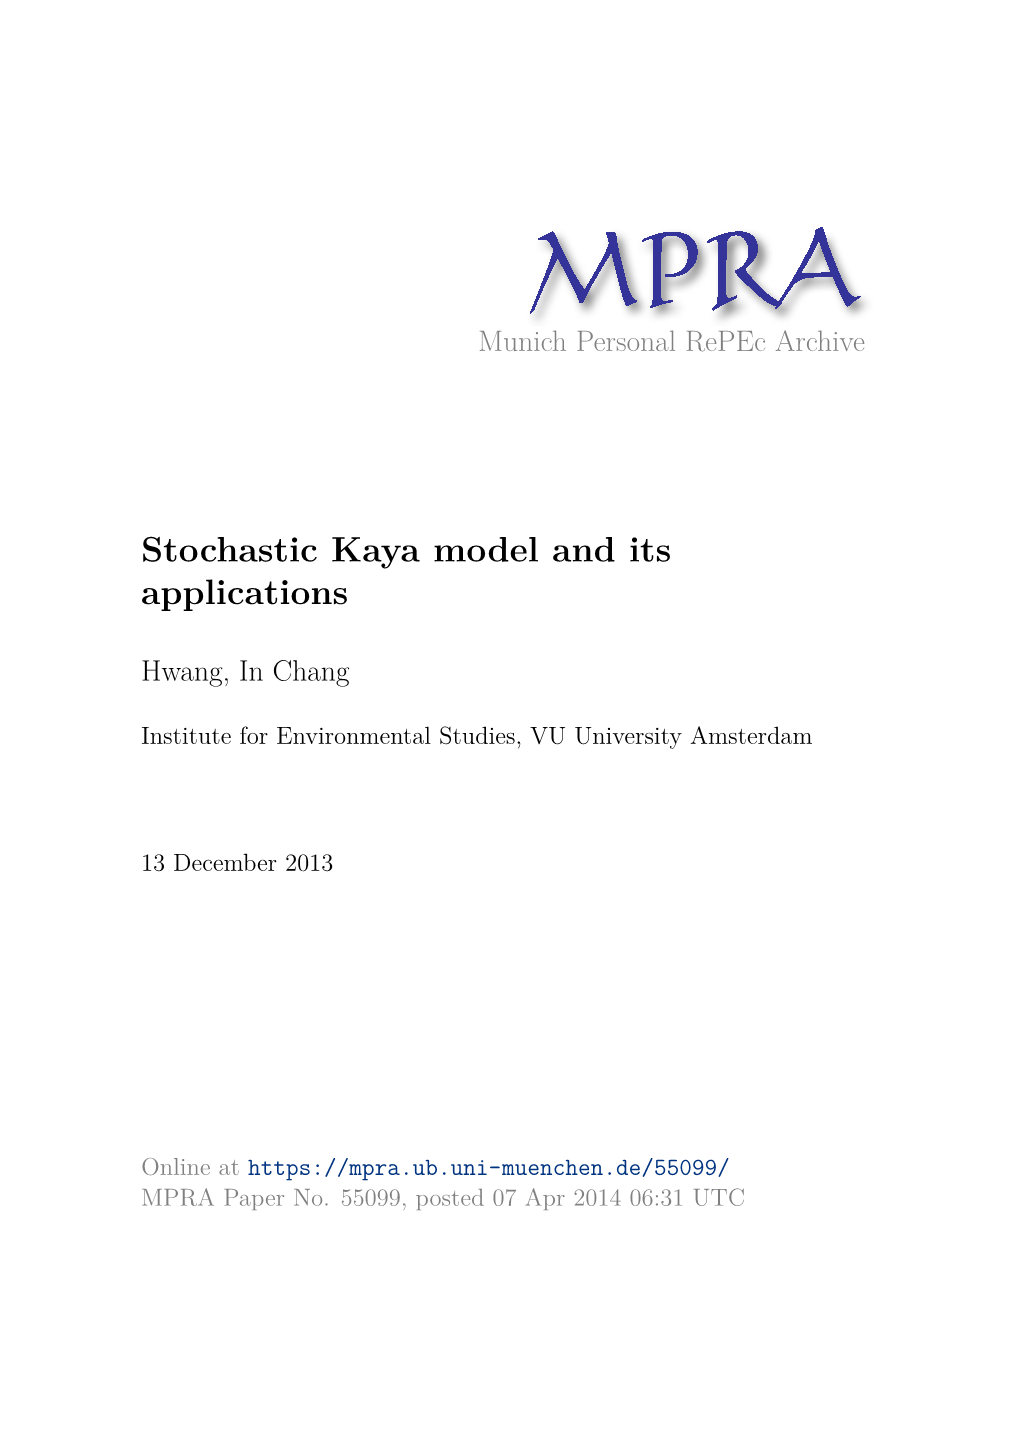 Stochastic Kaya Model and Its Applications